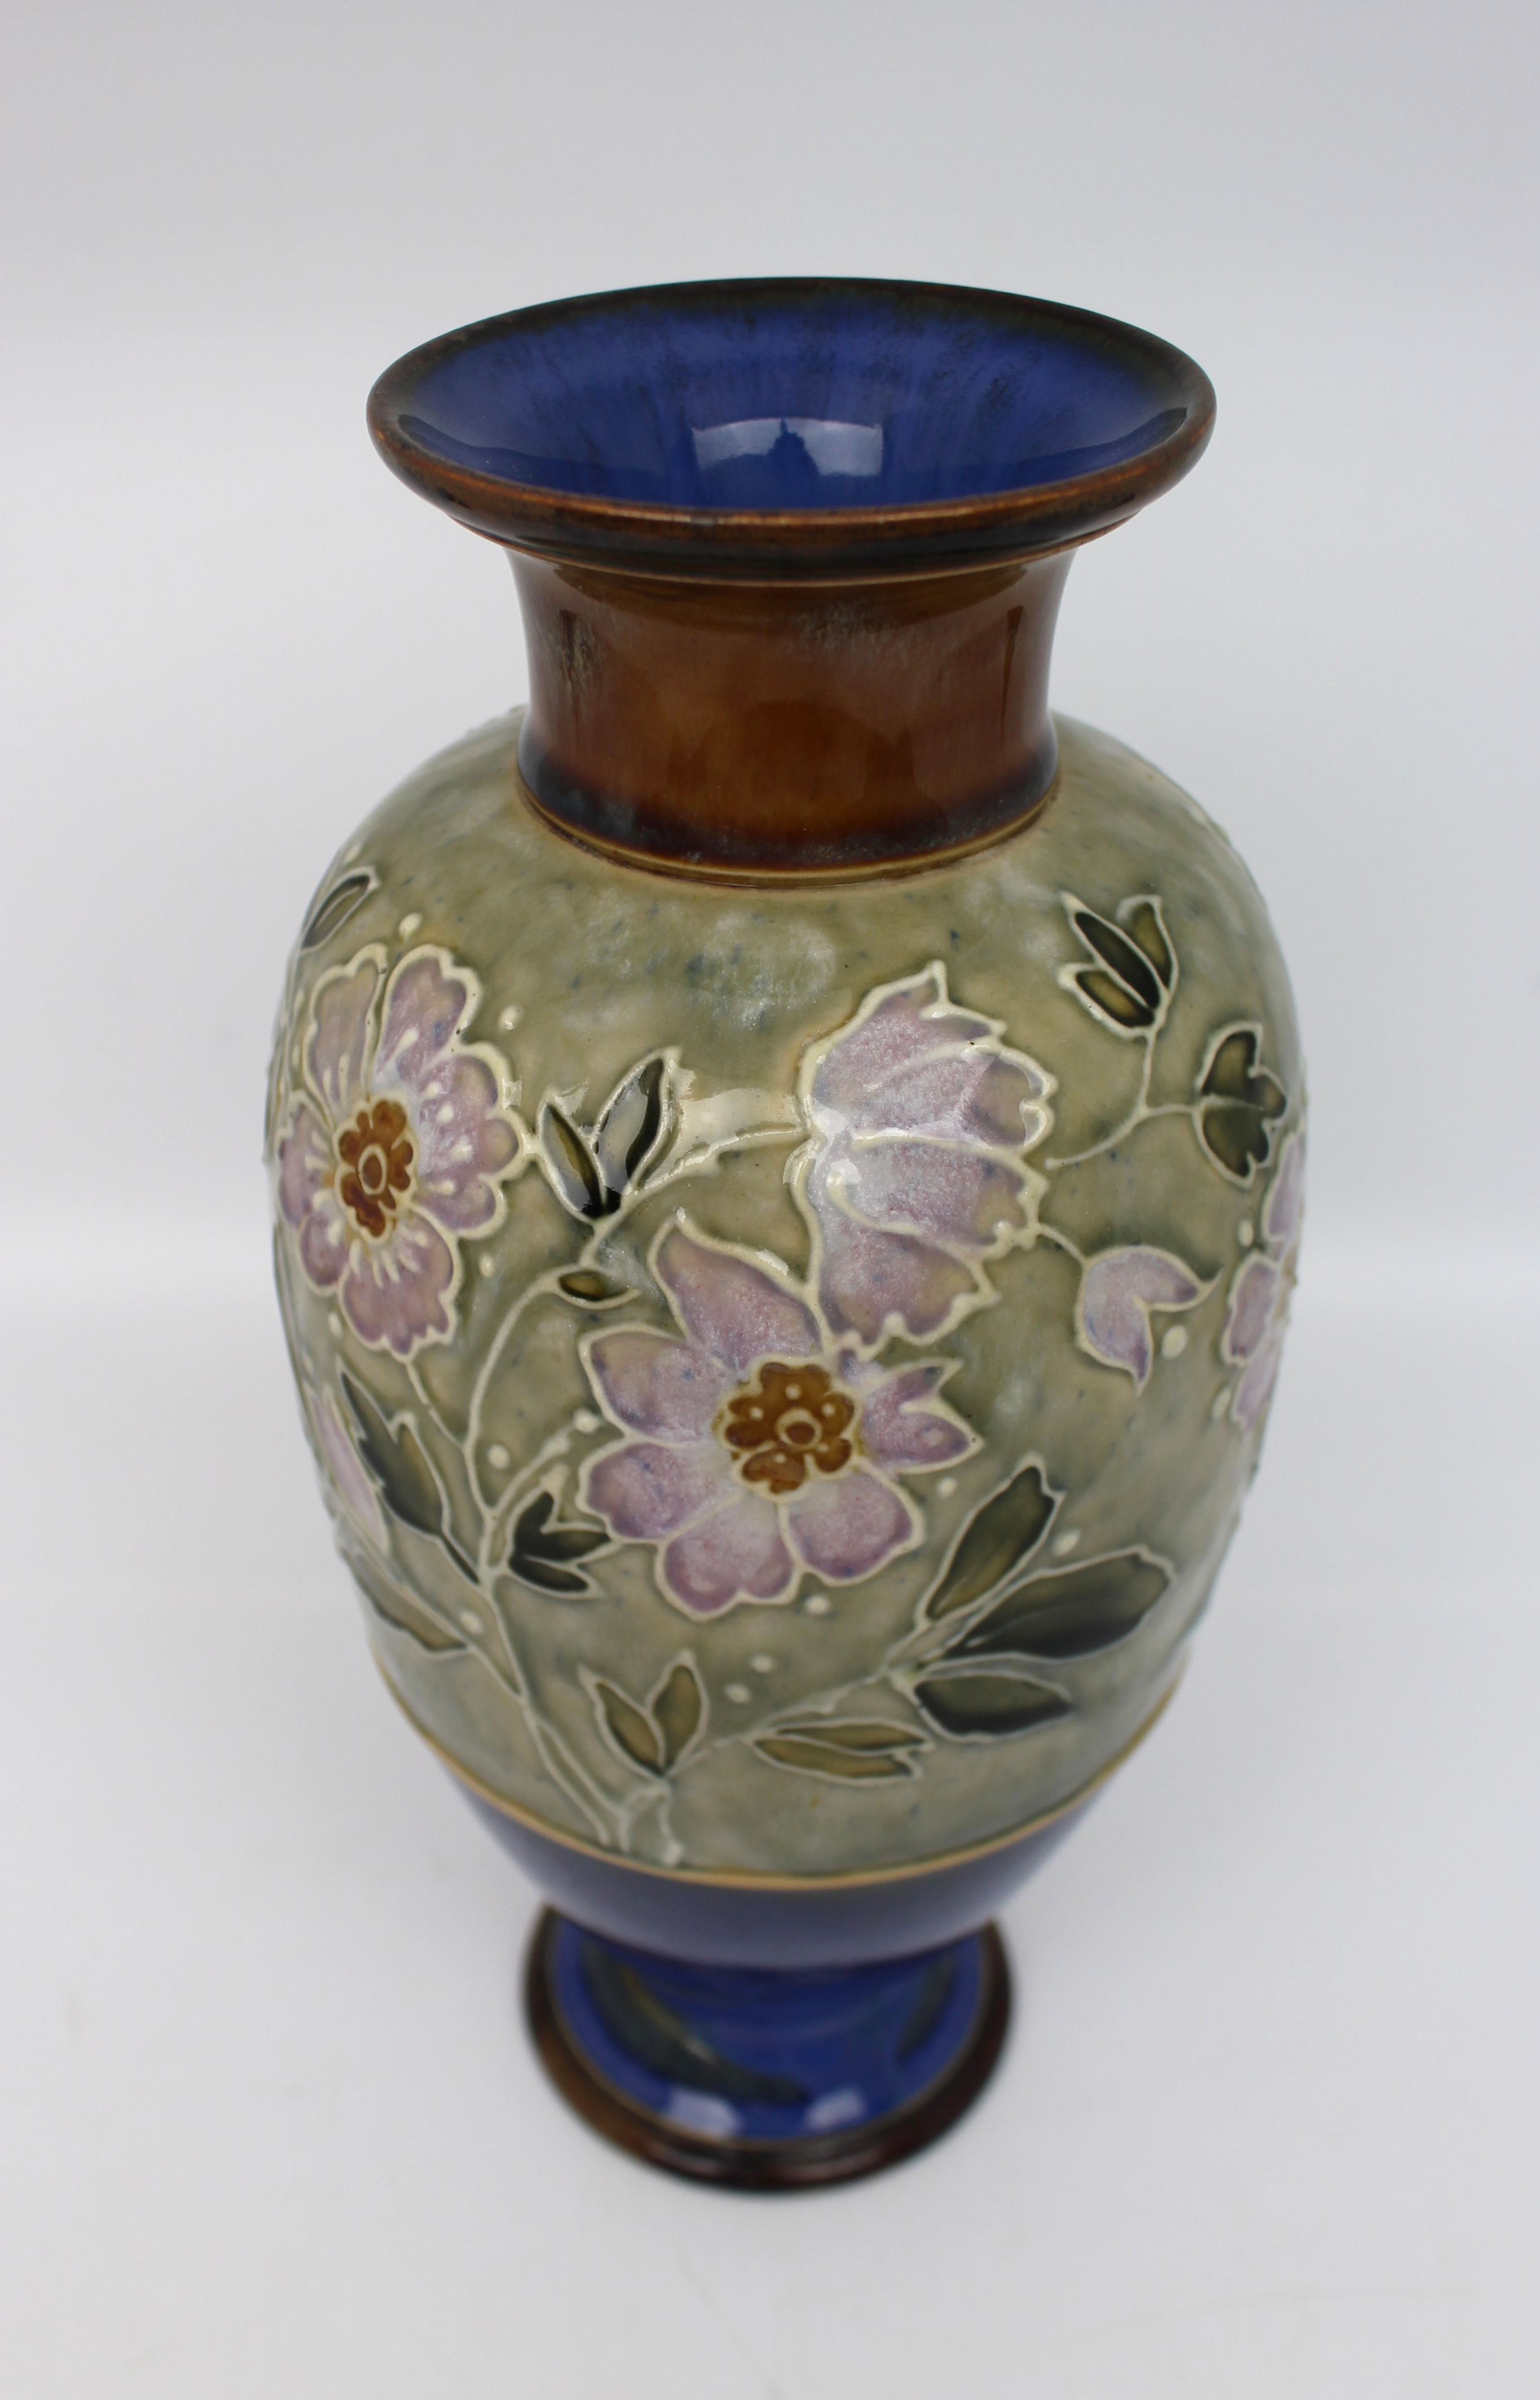 Early 20th C. Royal Doulton Vase - Image 4 of 4